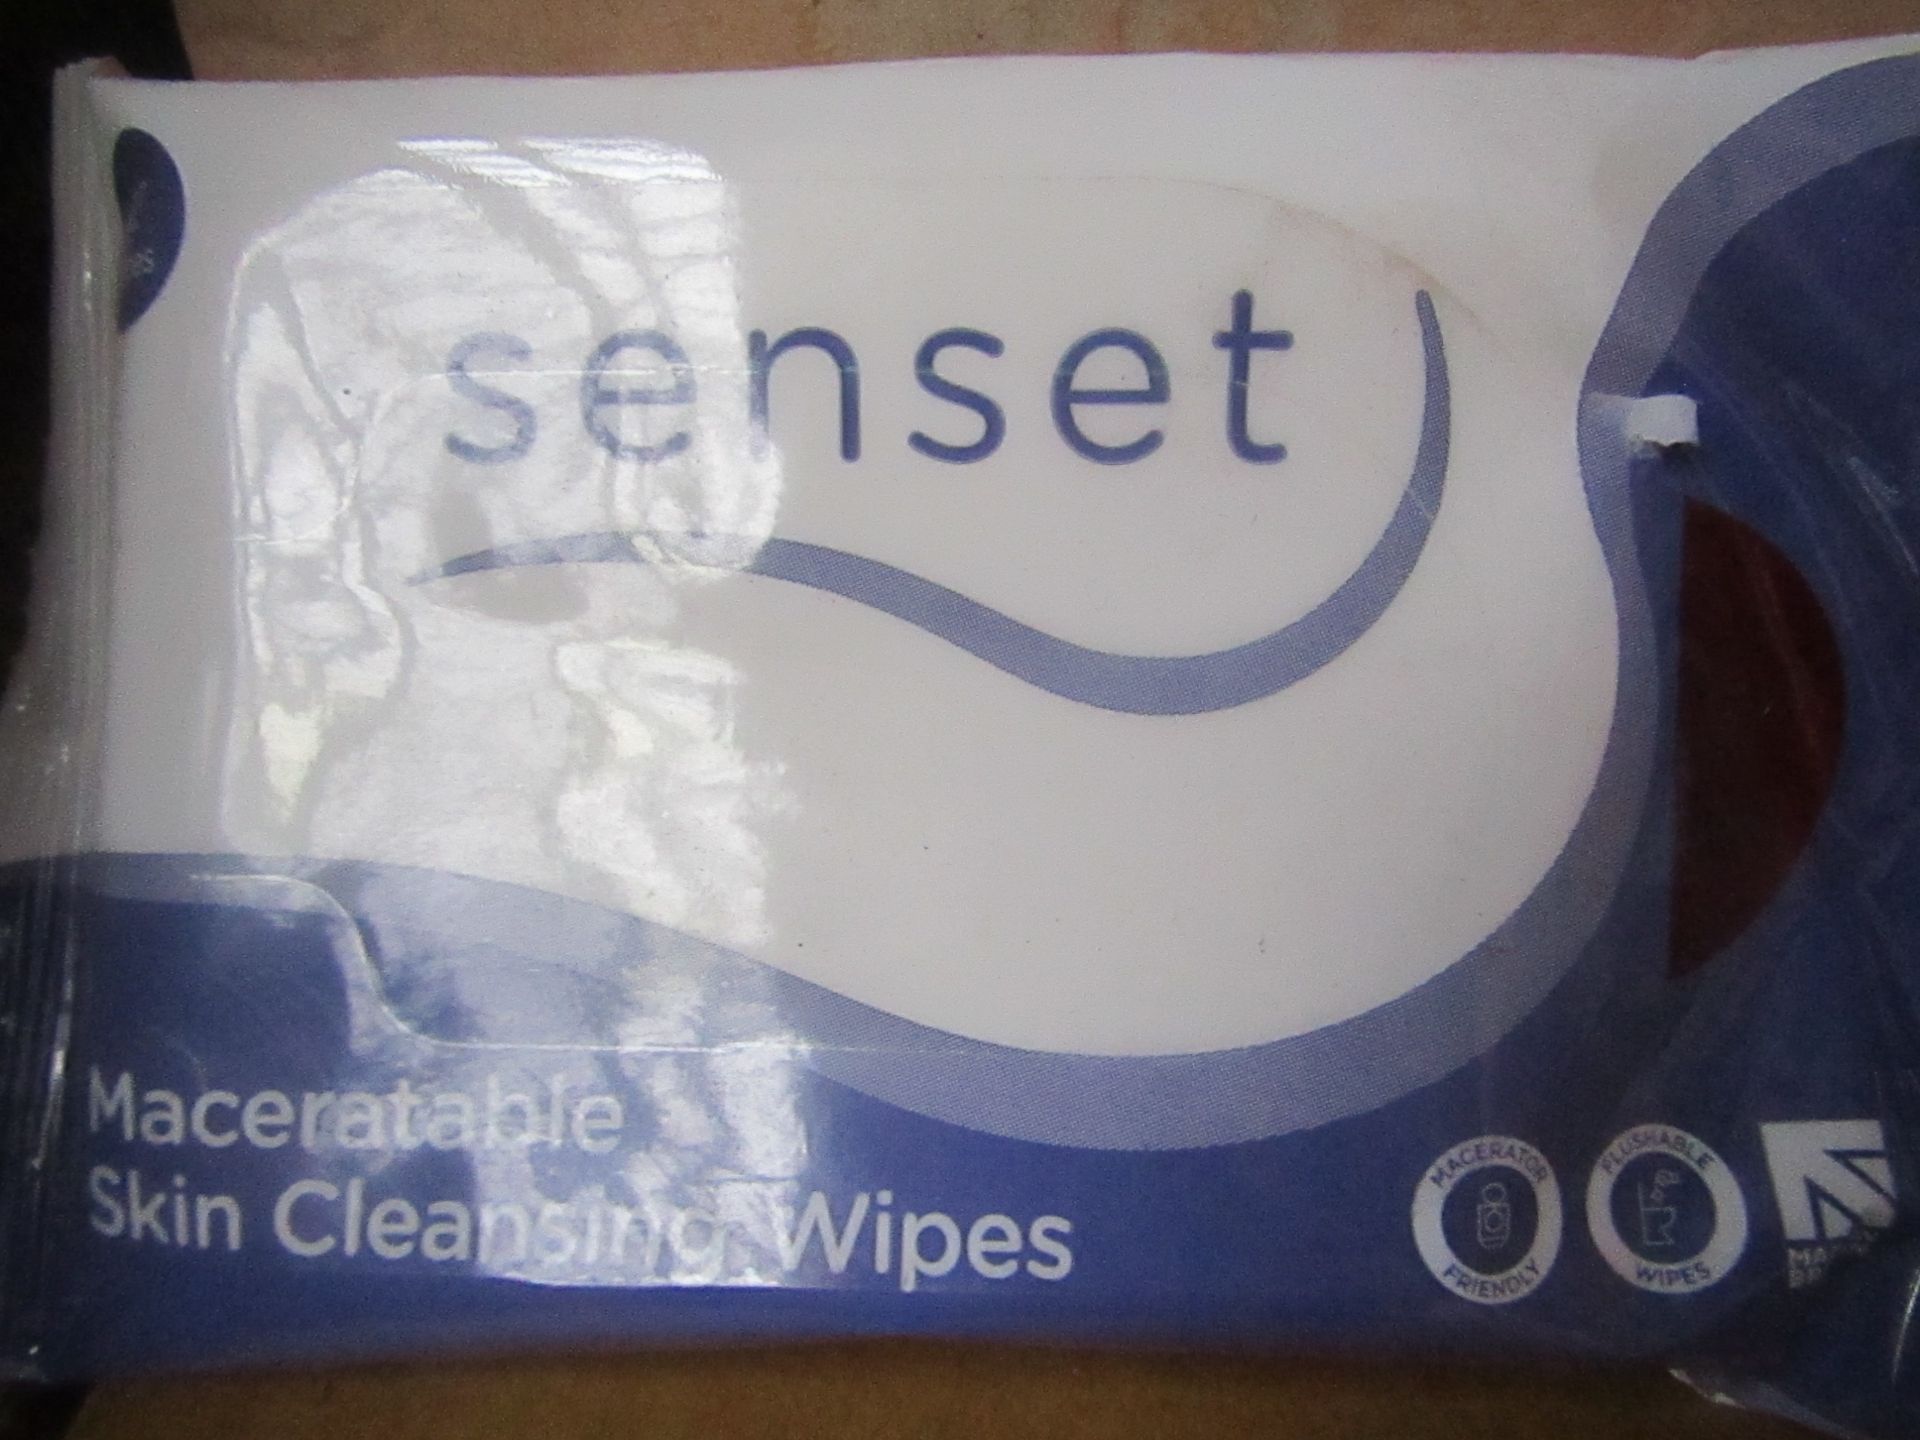 8x Senset - Maceratable Skin Cleansing Wipes (12 Wipes Per Pack) - New & Packaged.